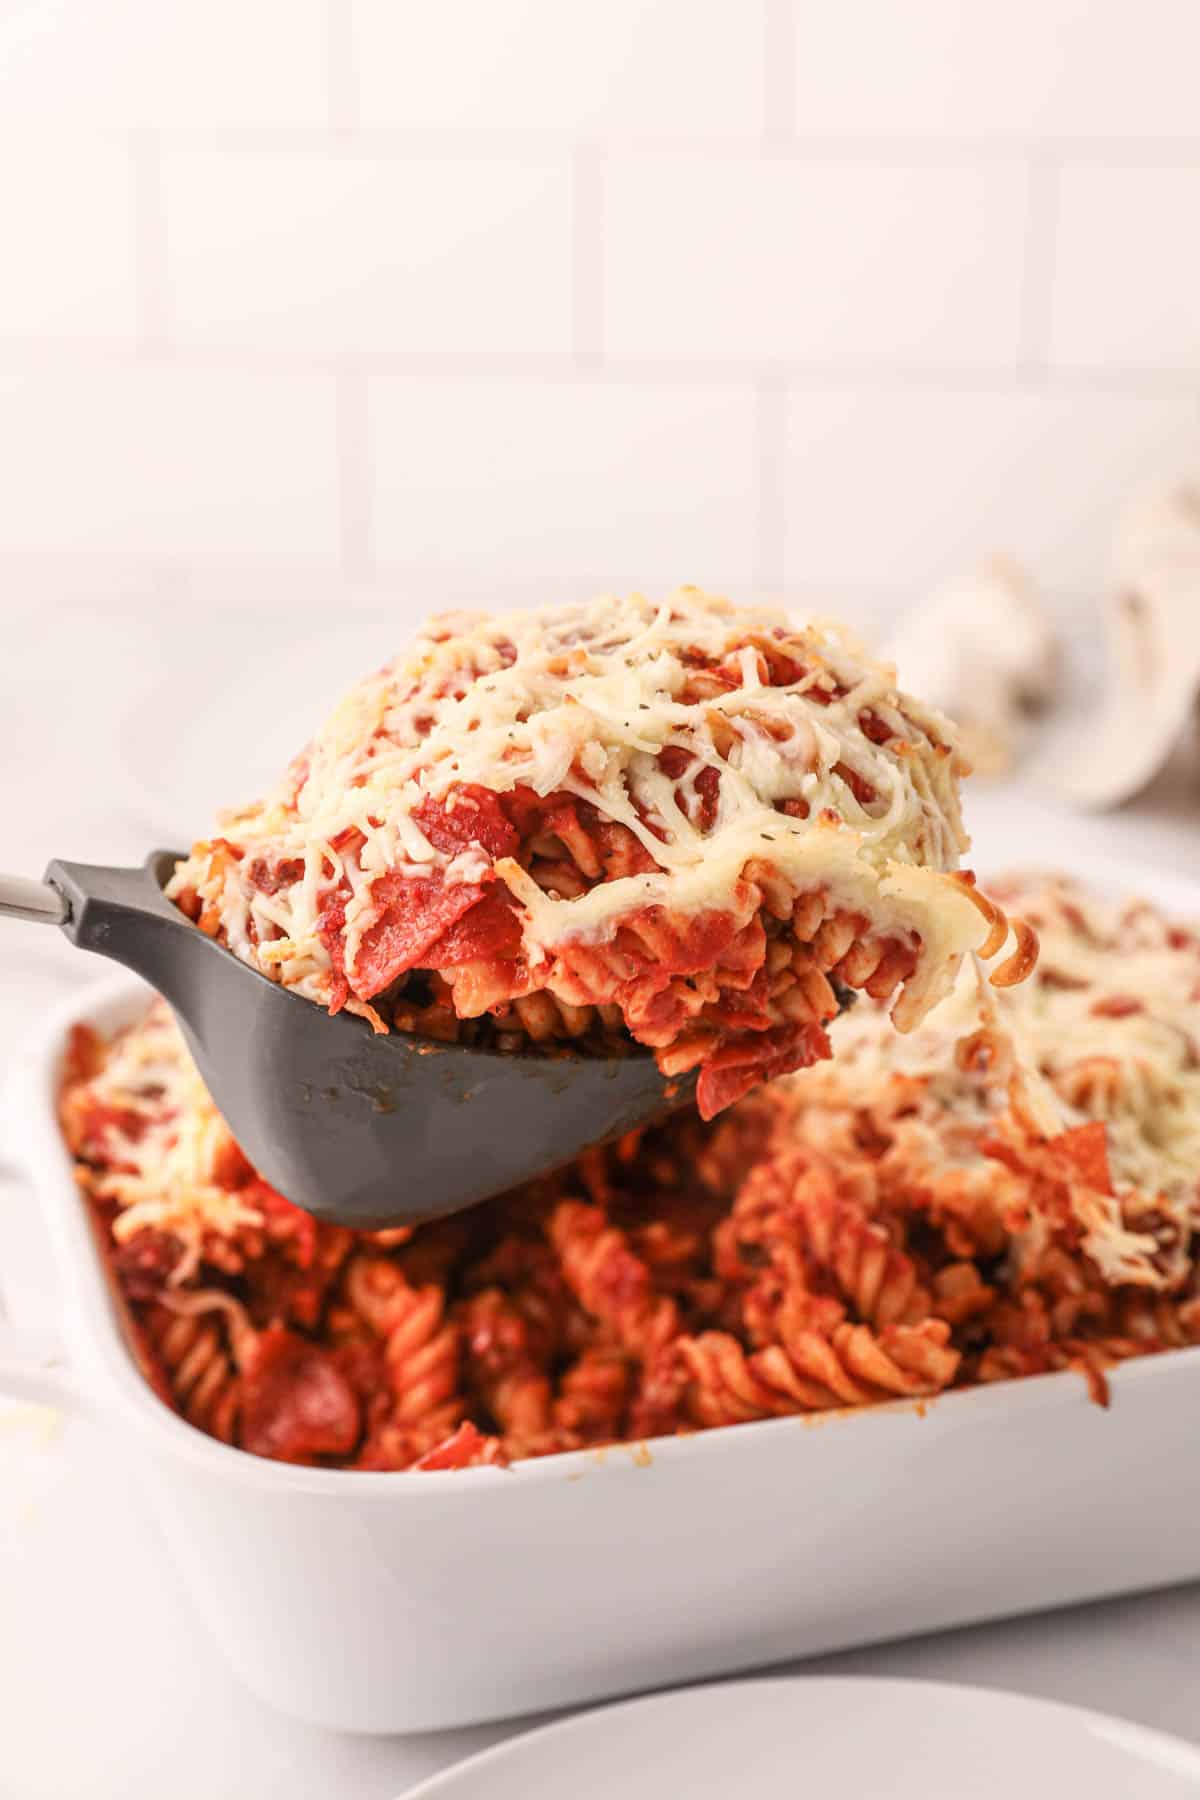 A large spoon lifting a scoop of pizza pasta from a casserole dish.